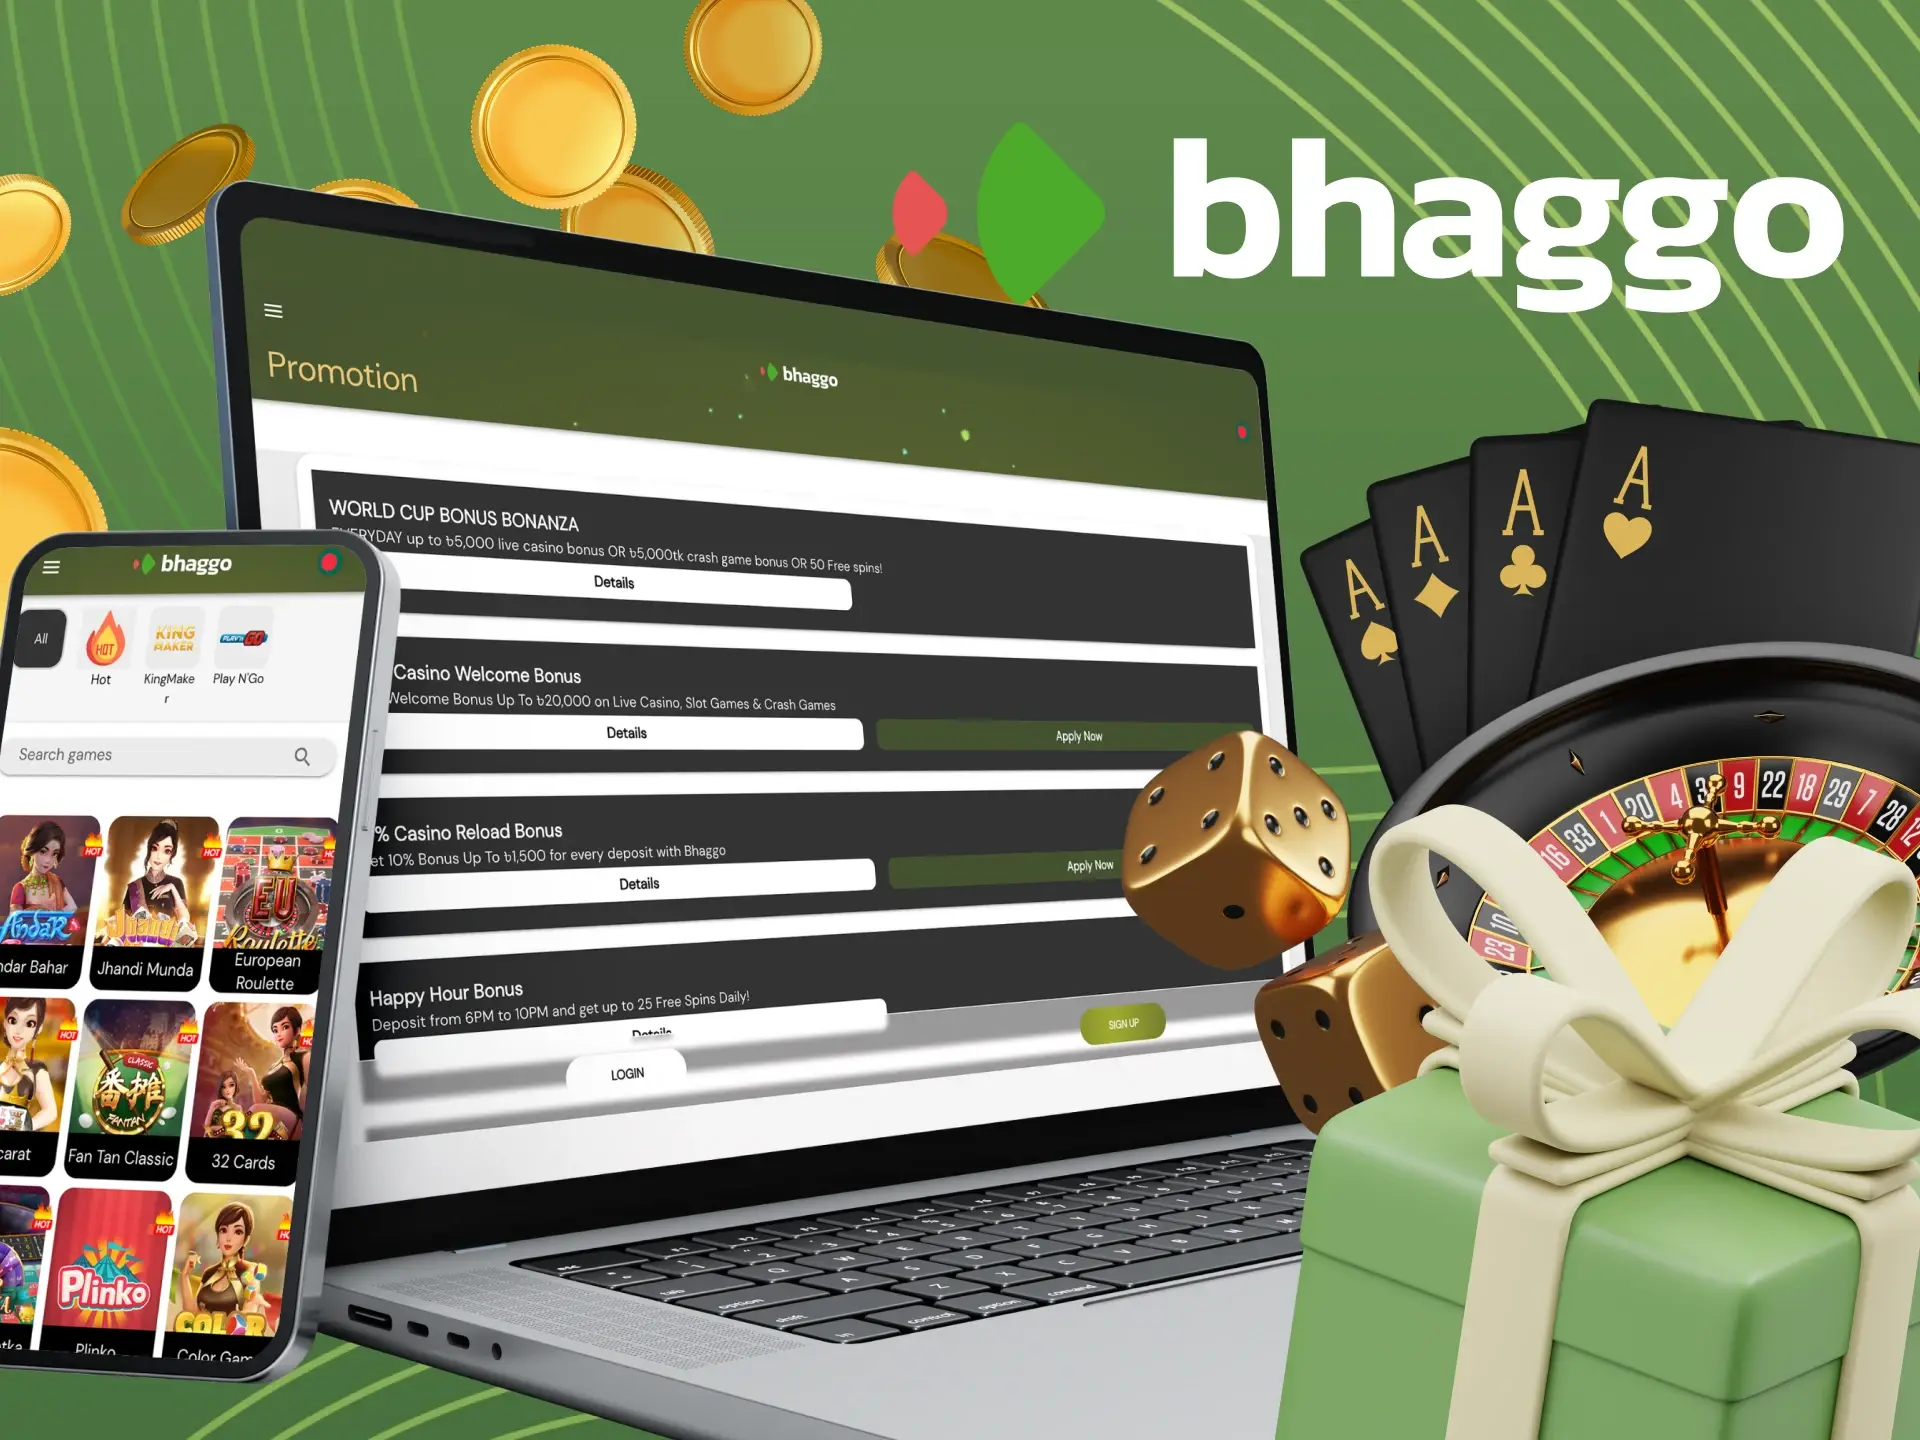 Big bonuses and interesting promotions for Bhaggo table games.